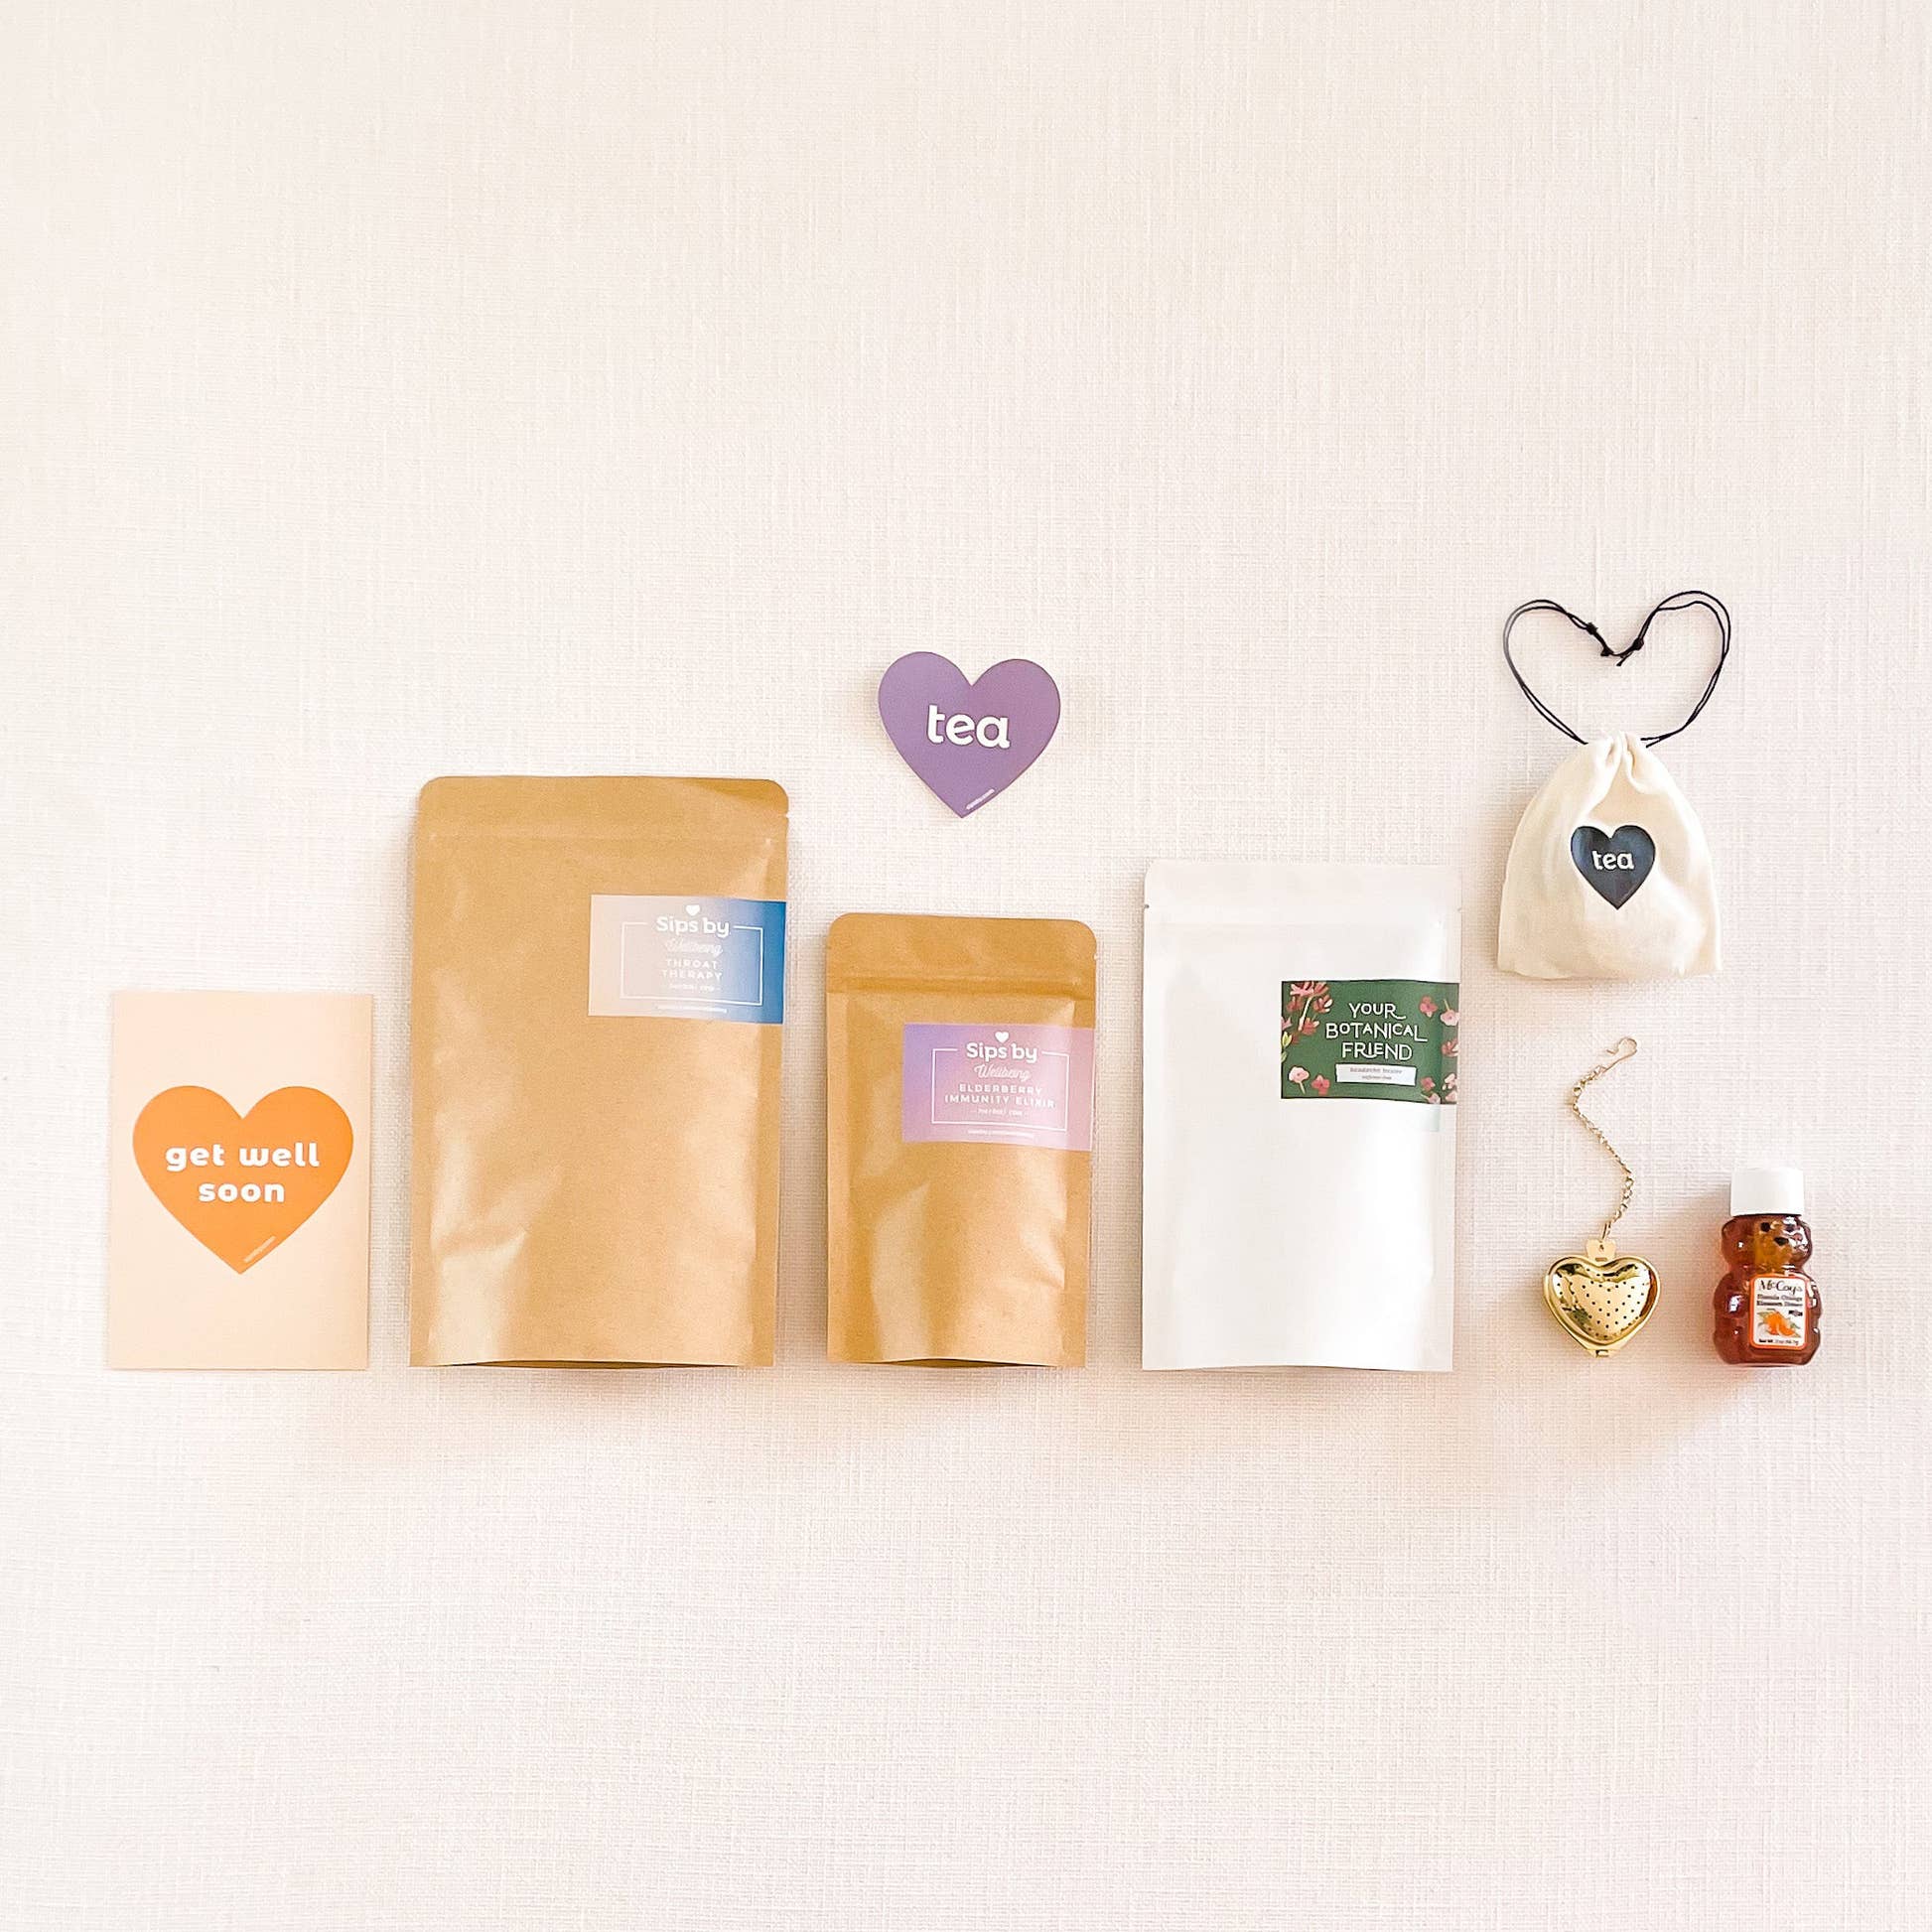 Get Well Soon Tea Kit at Sips by